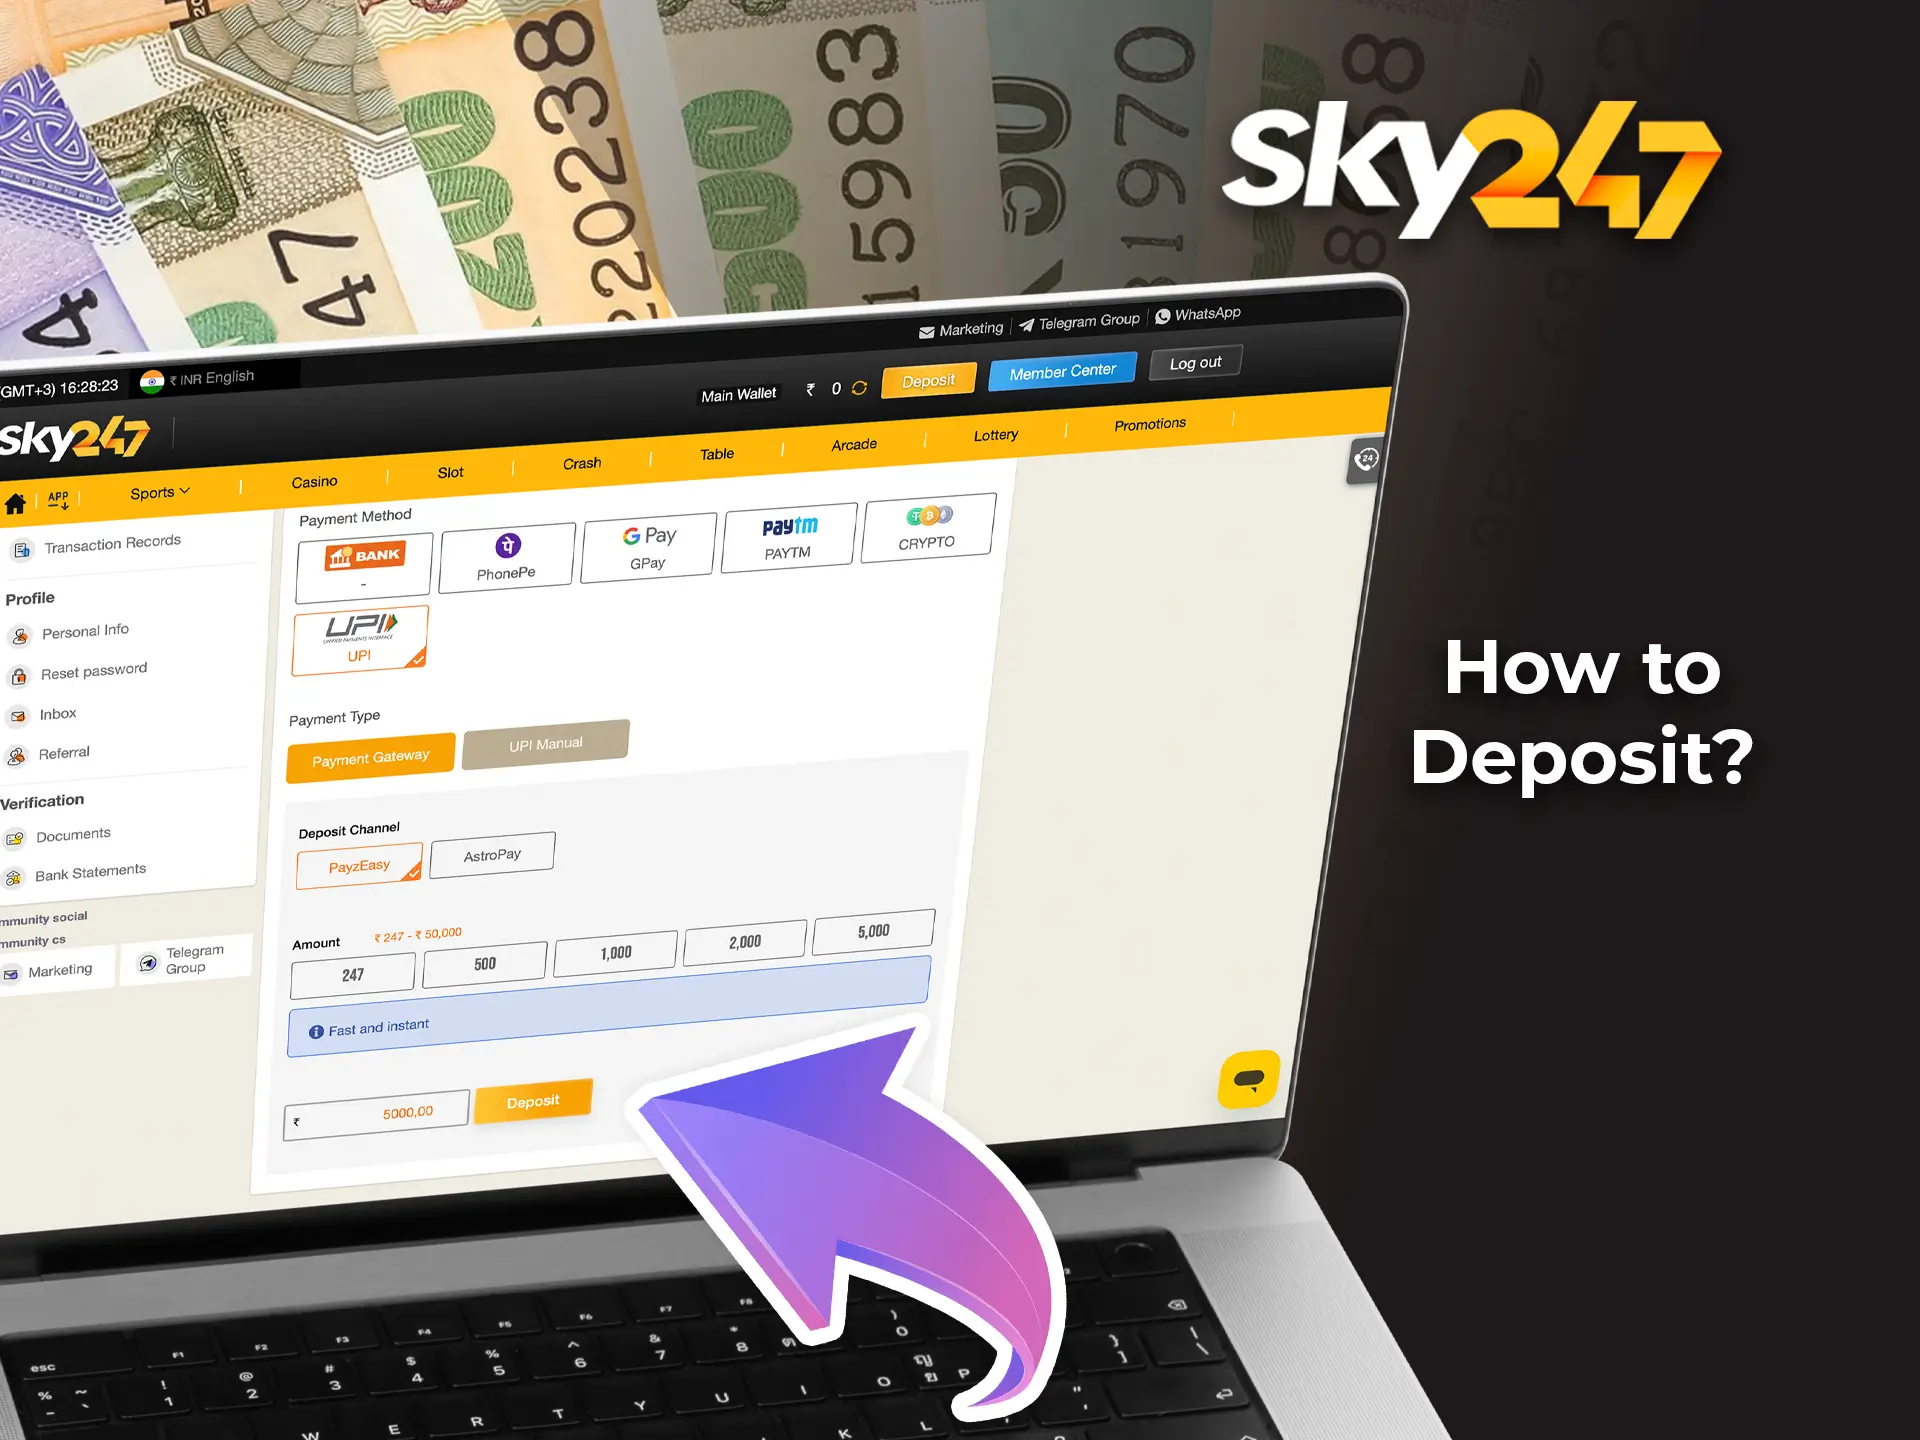 Use the most favourable methods of funding your account at Sky247 Casino.